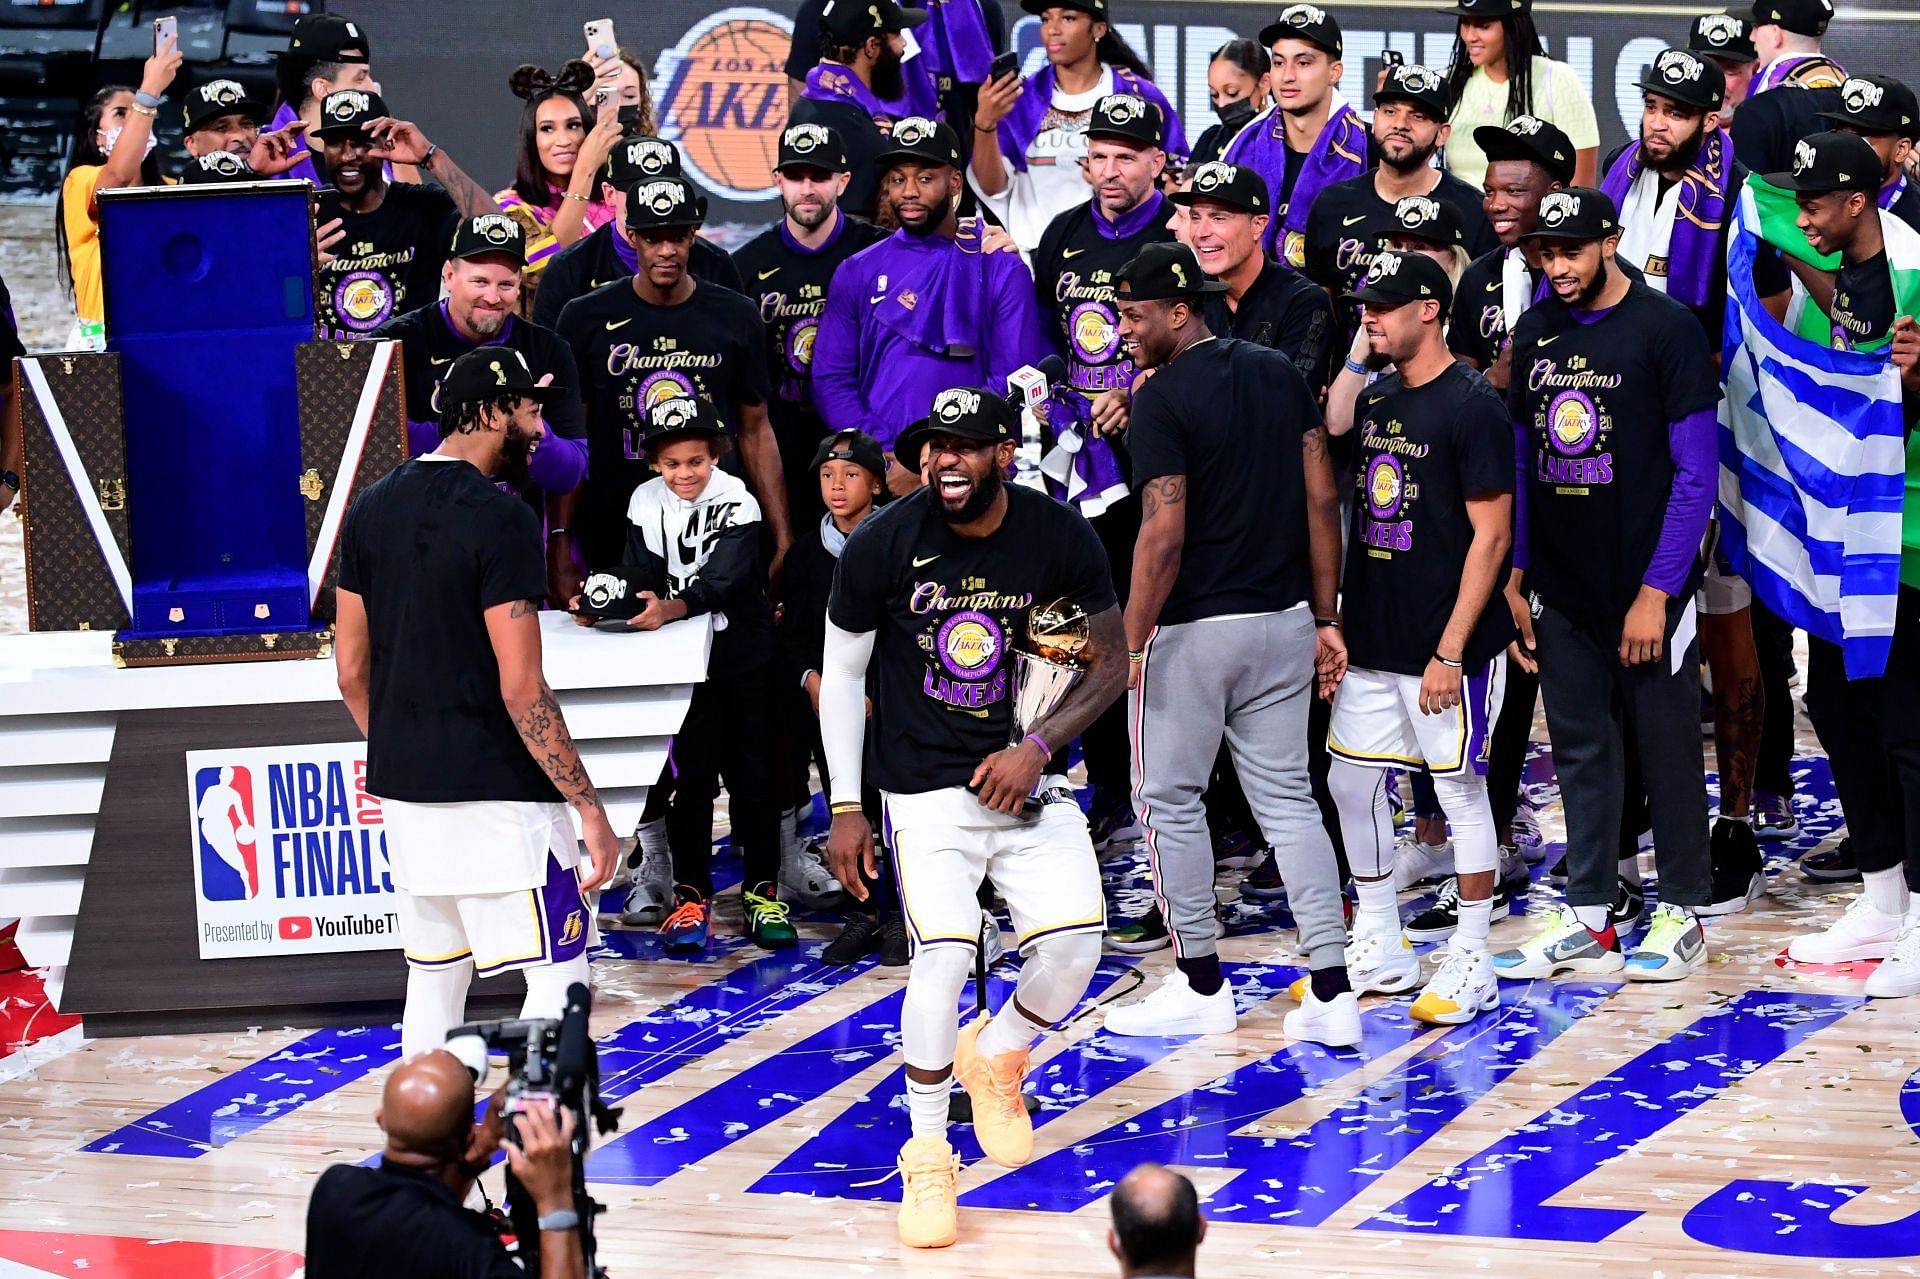 The Lakers celebrate winning the 2020 NBA Finals.